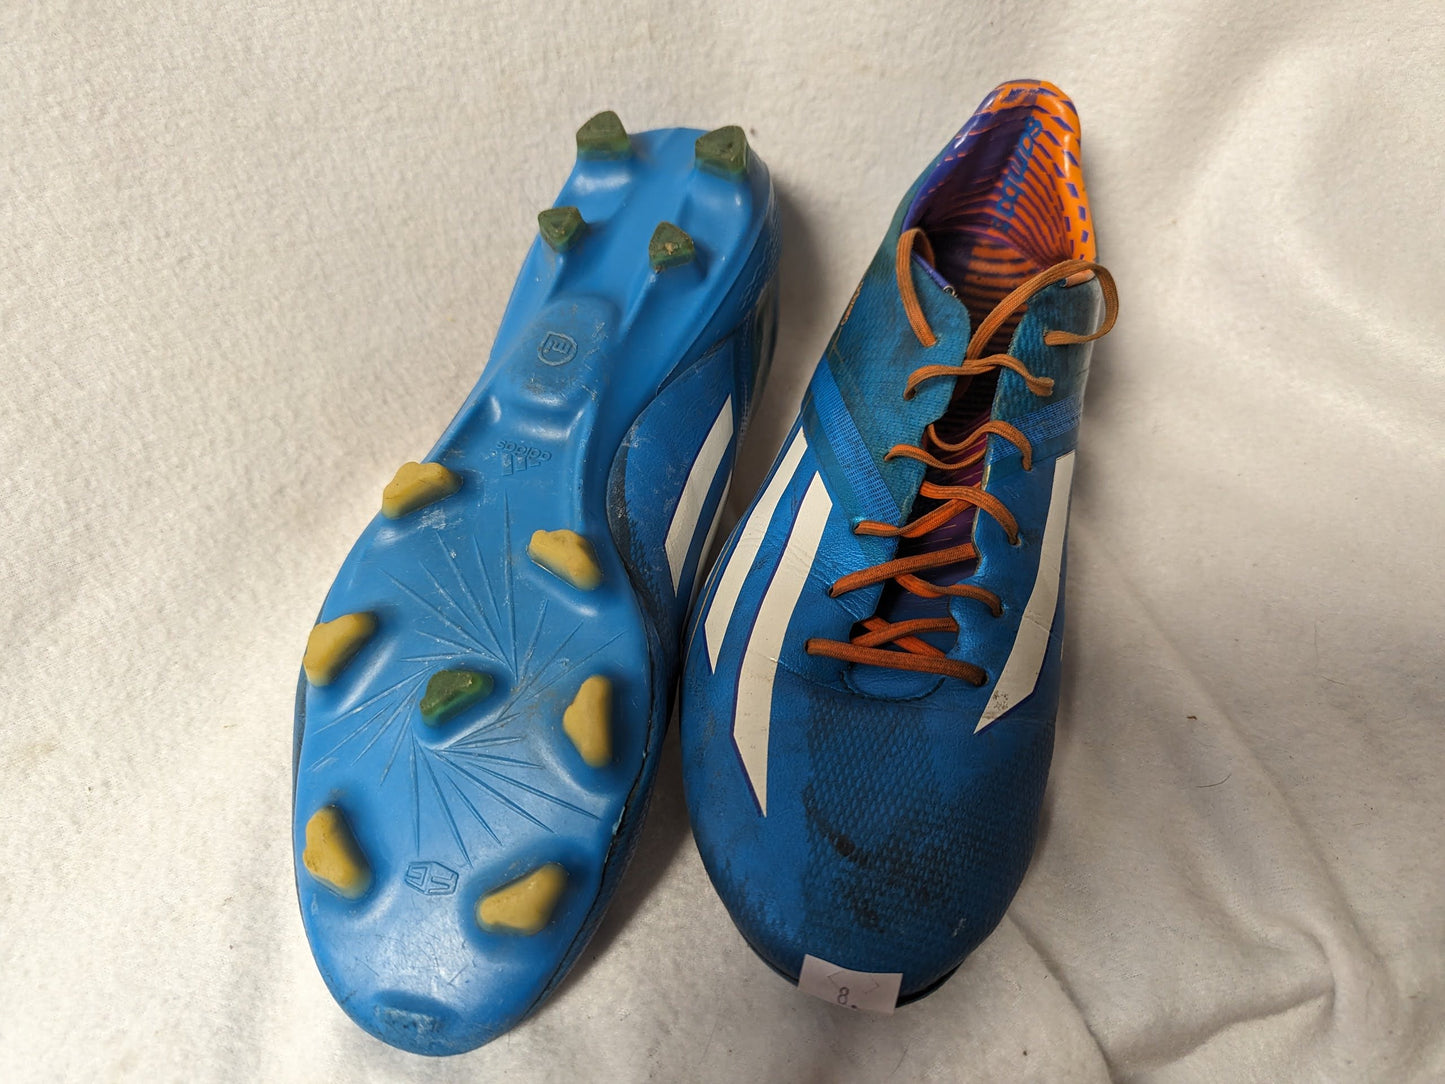 Adidas Cleats Size 8 Color Blue Condition Used